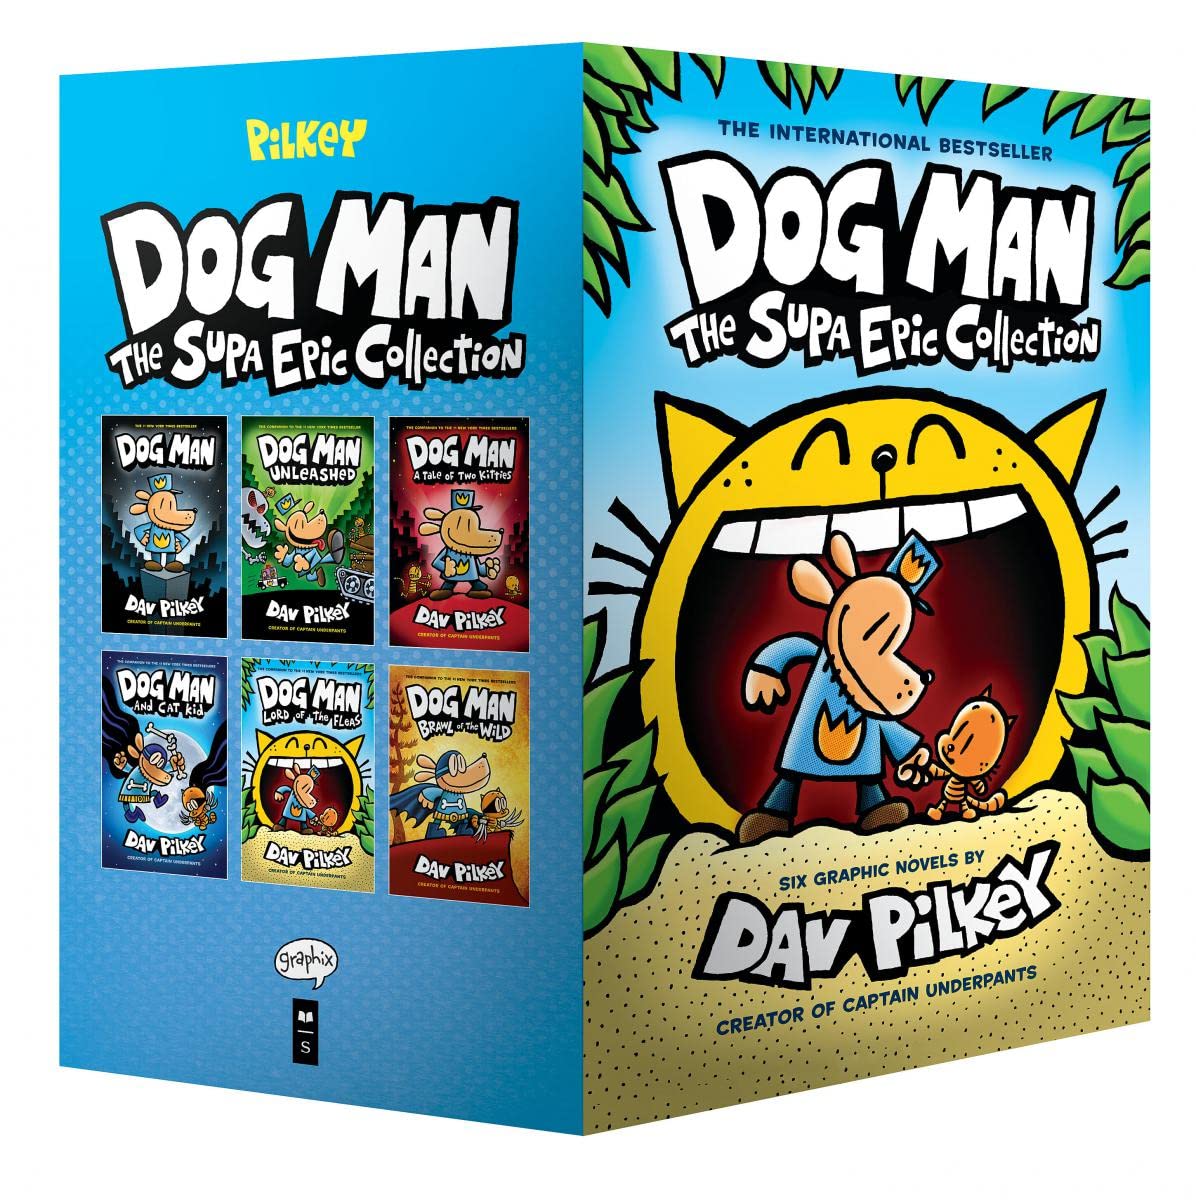 Dog Man: The Super Epic Collection